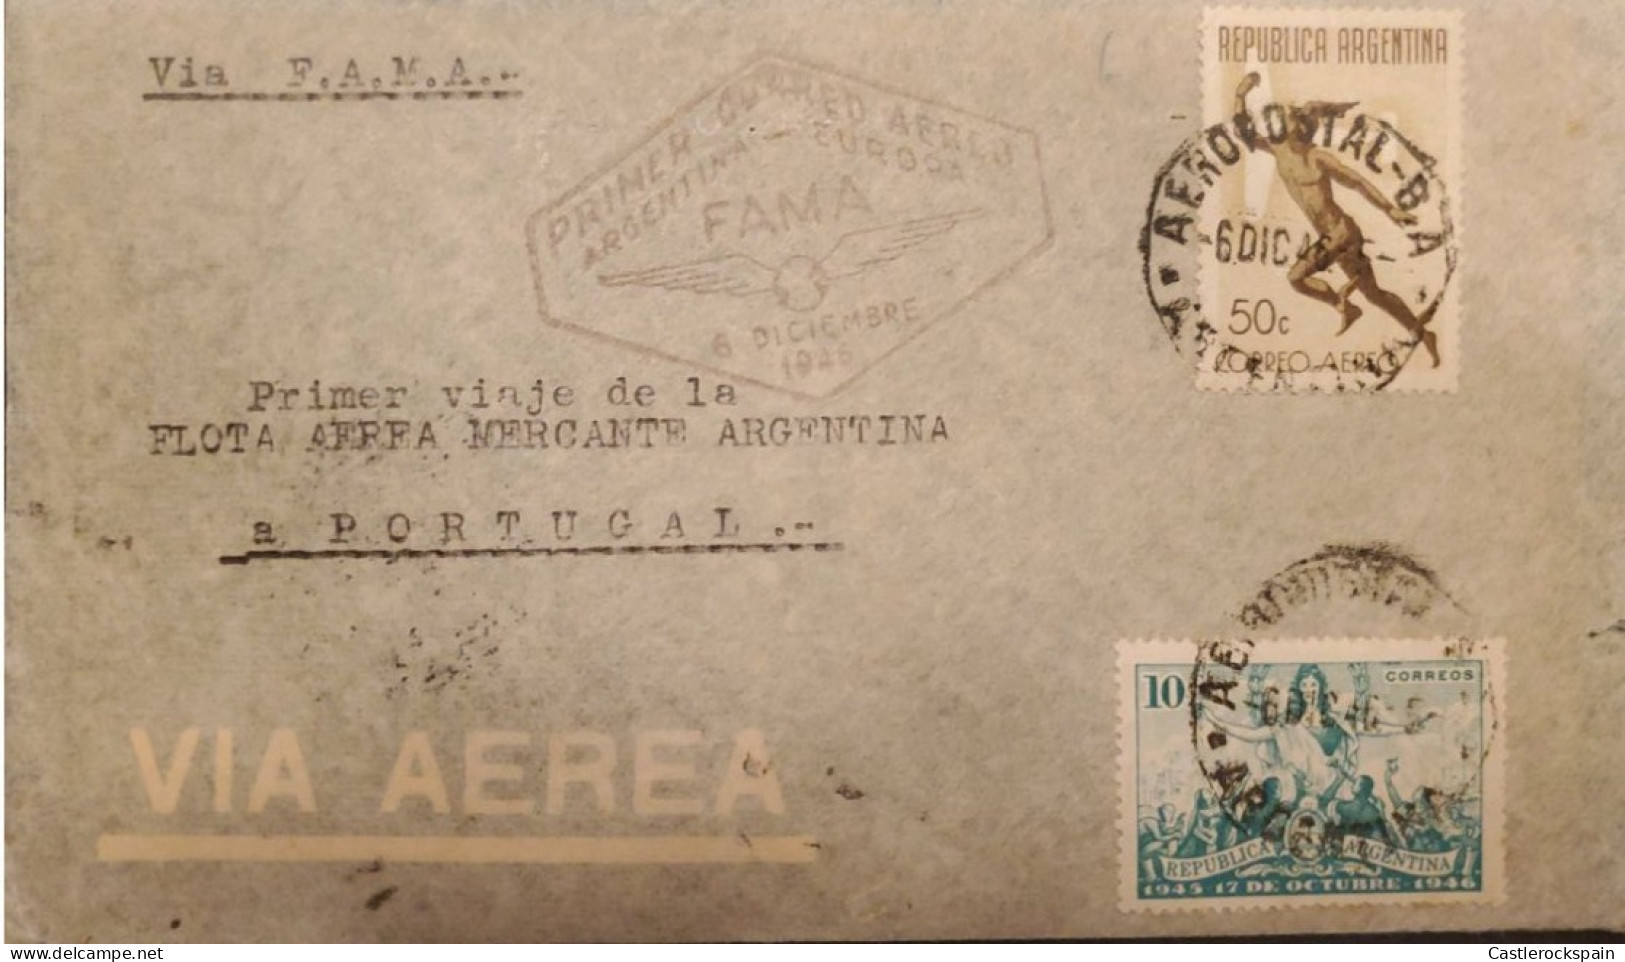 MI) 1946, ARGENTINA, VIA F.A.M.A, AEROPOSTAL, AIR MAIL, FROM BUENOS AIRES TO PORTUGAL, LIBERTY REVOLUTION SALUTING THE P - Gebruikt